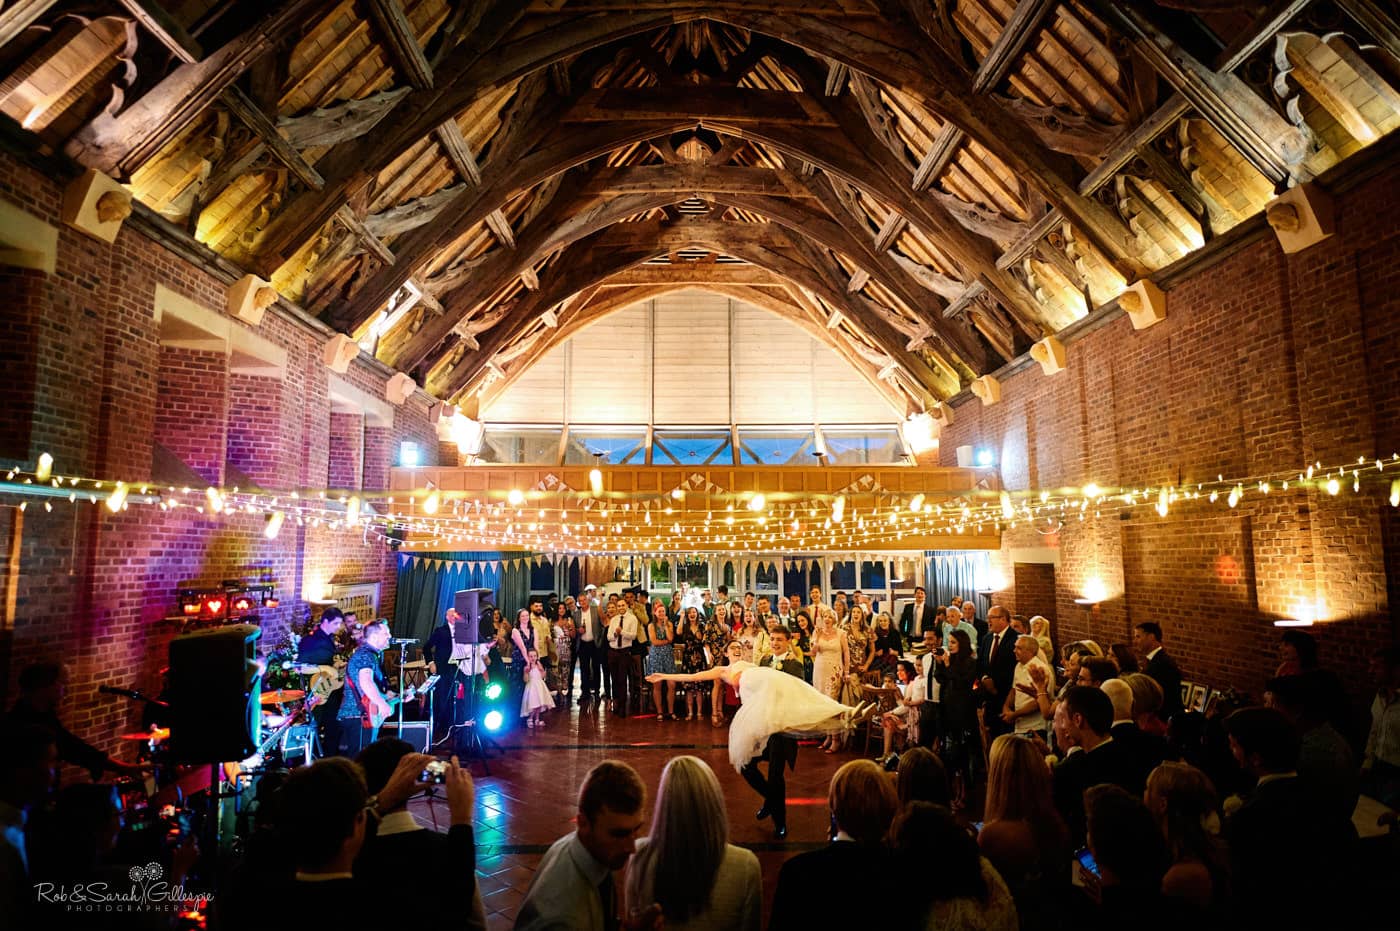 Guesten Hall at Avoncroft Museum with wedding evening party